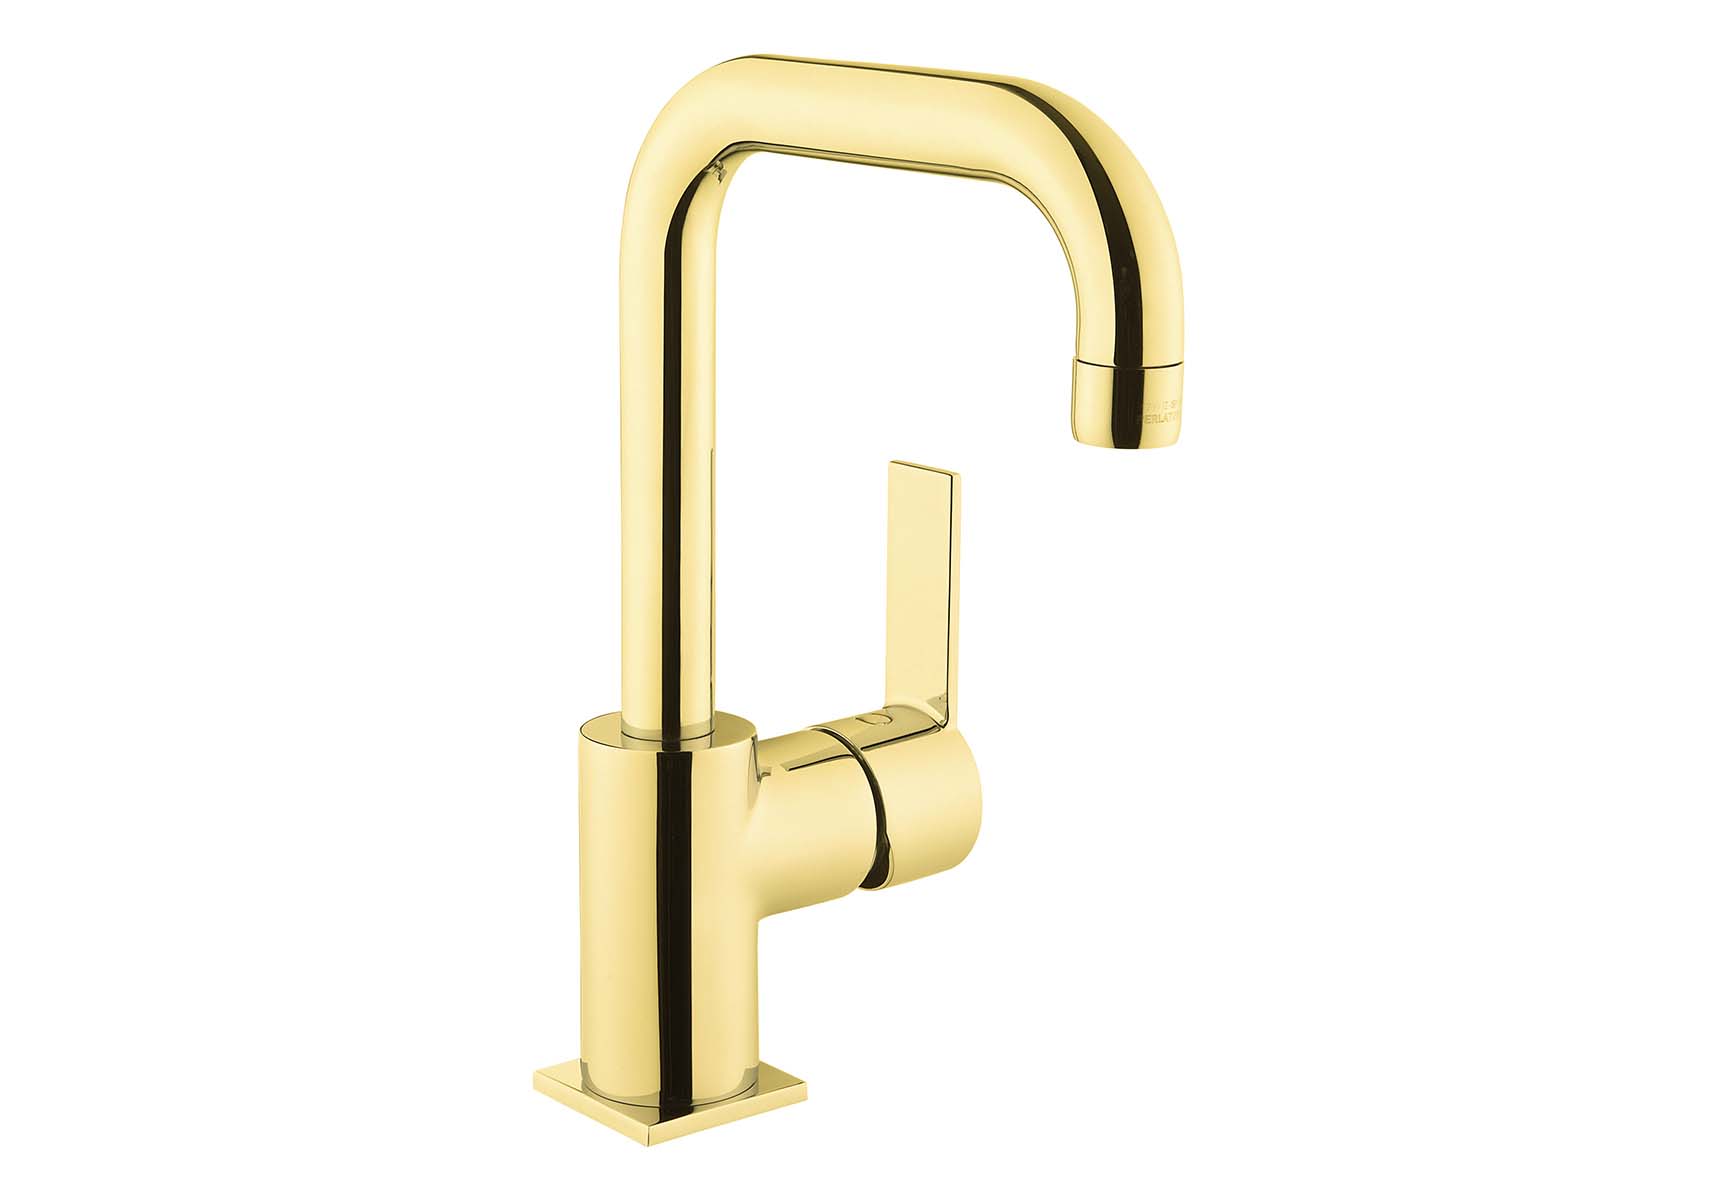 Flo S Basin Mixer , With Swivel Spout, Gold